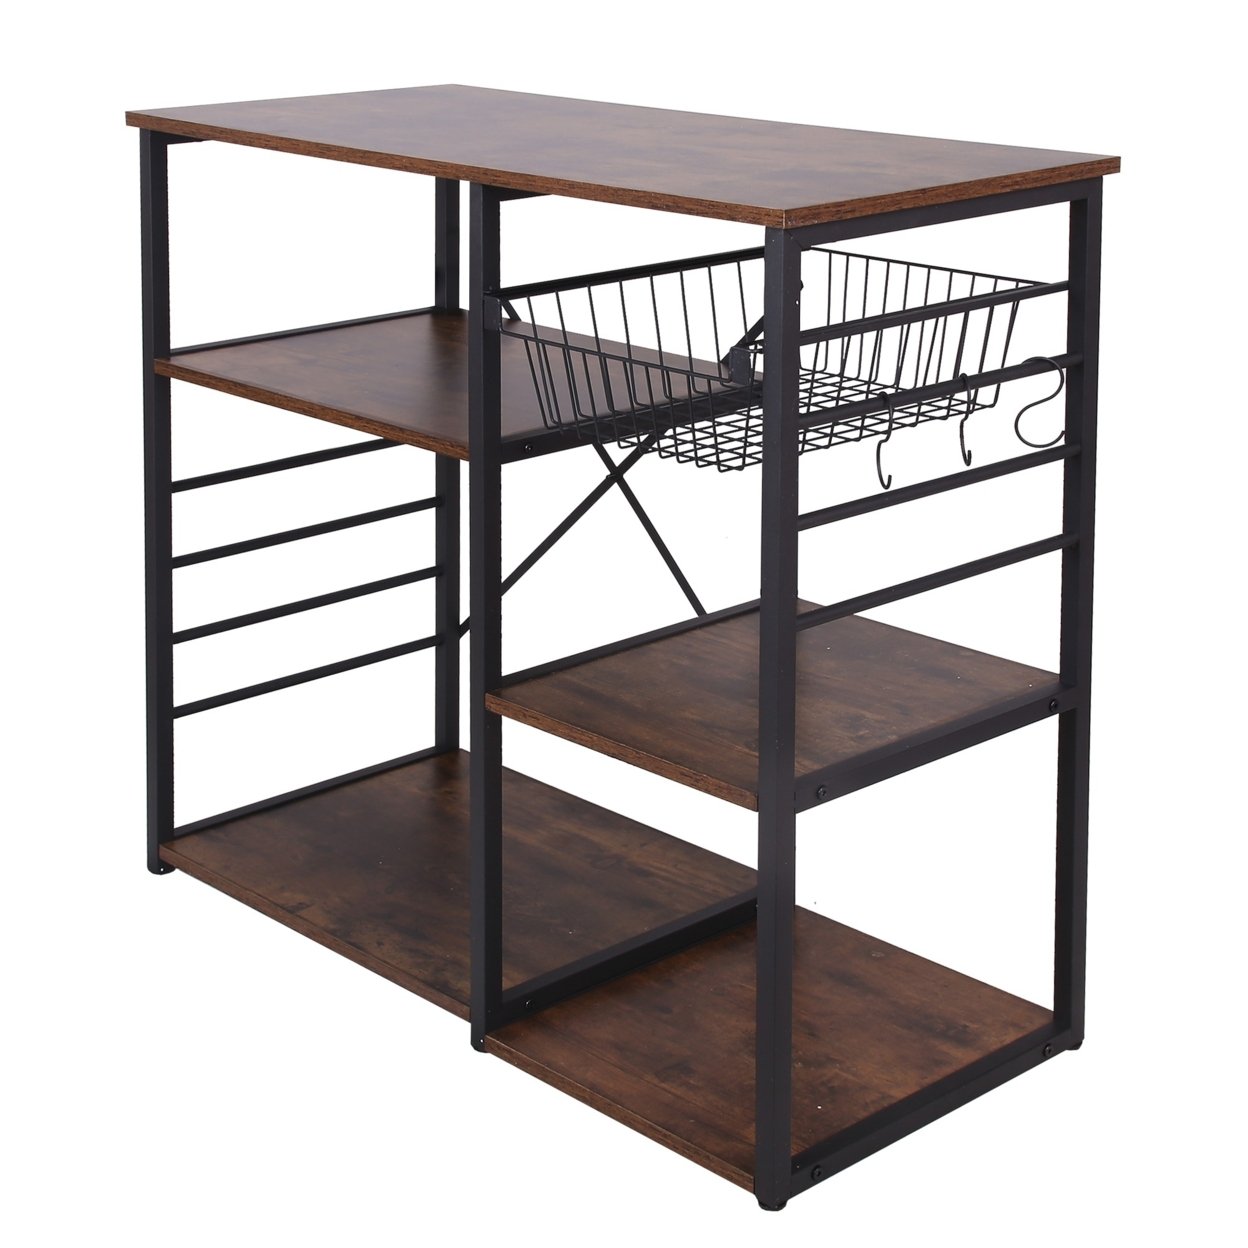 Wood And Metal Bakers Rack With 4 Shelves And Wire Basket, Brown And Black- Saltoro Sherpi